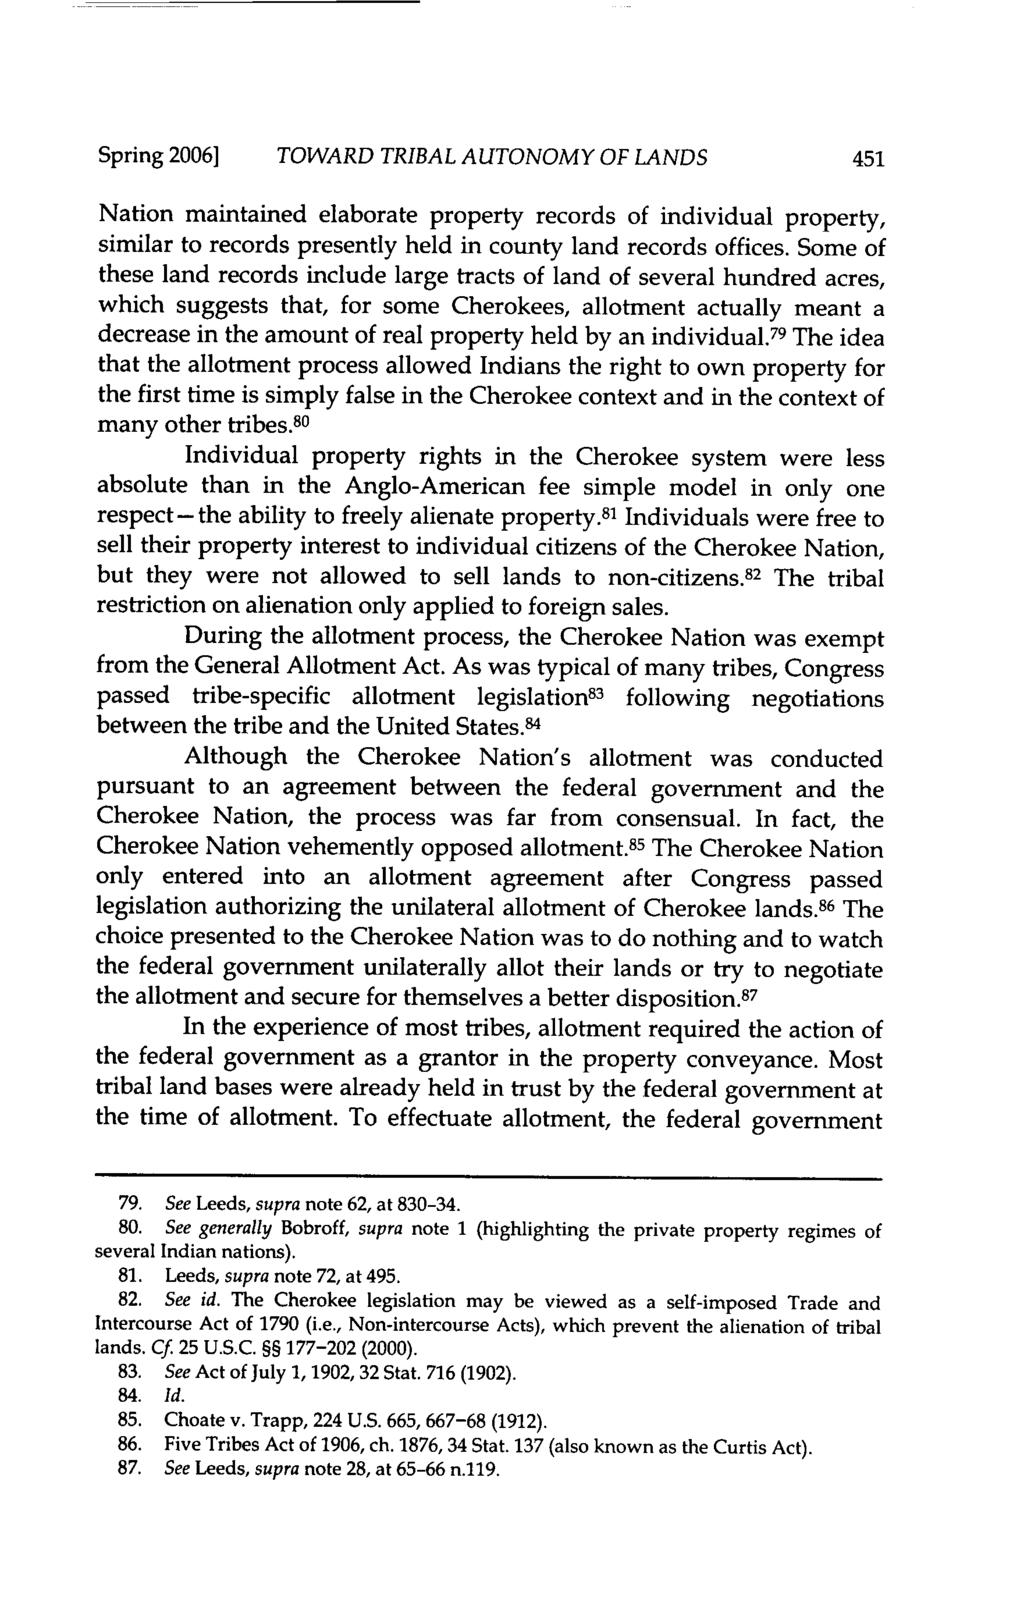 Spring 2006] TOWARD TRIBAL AUTONOMY OF LANDS 451 Nation maintained elaborate property records of individual property, similar to records presently held in county land records offices.